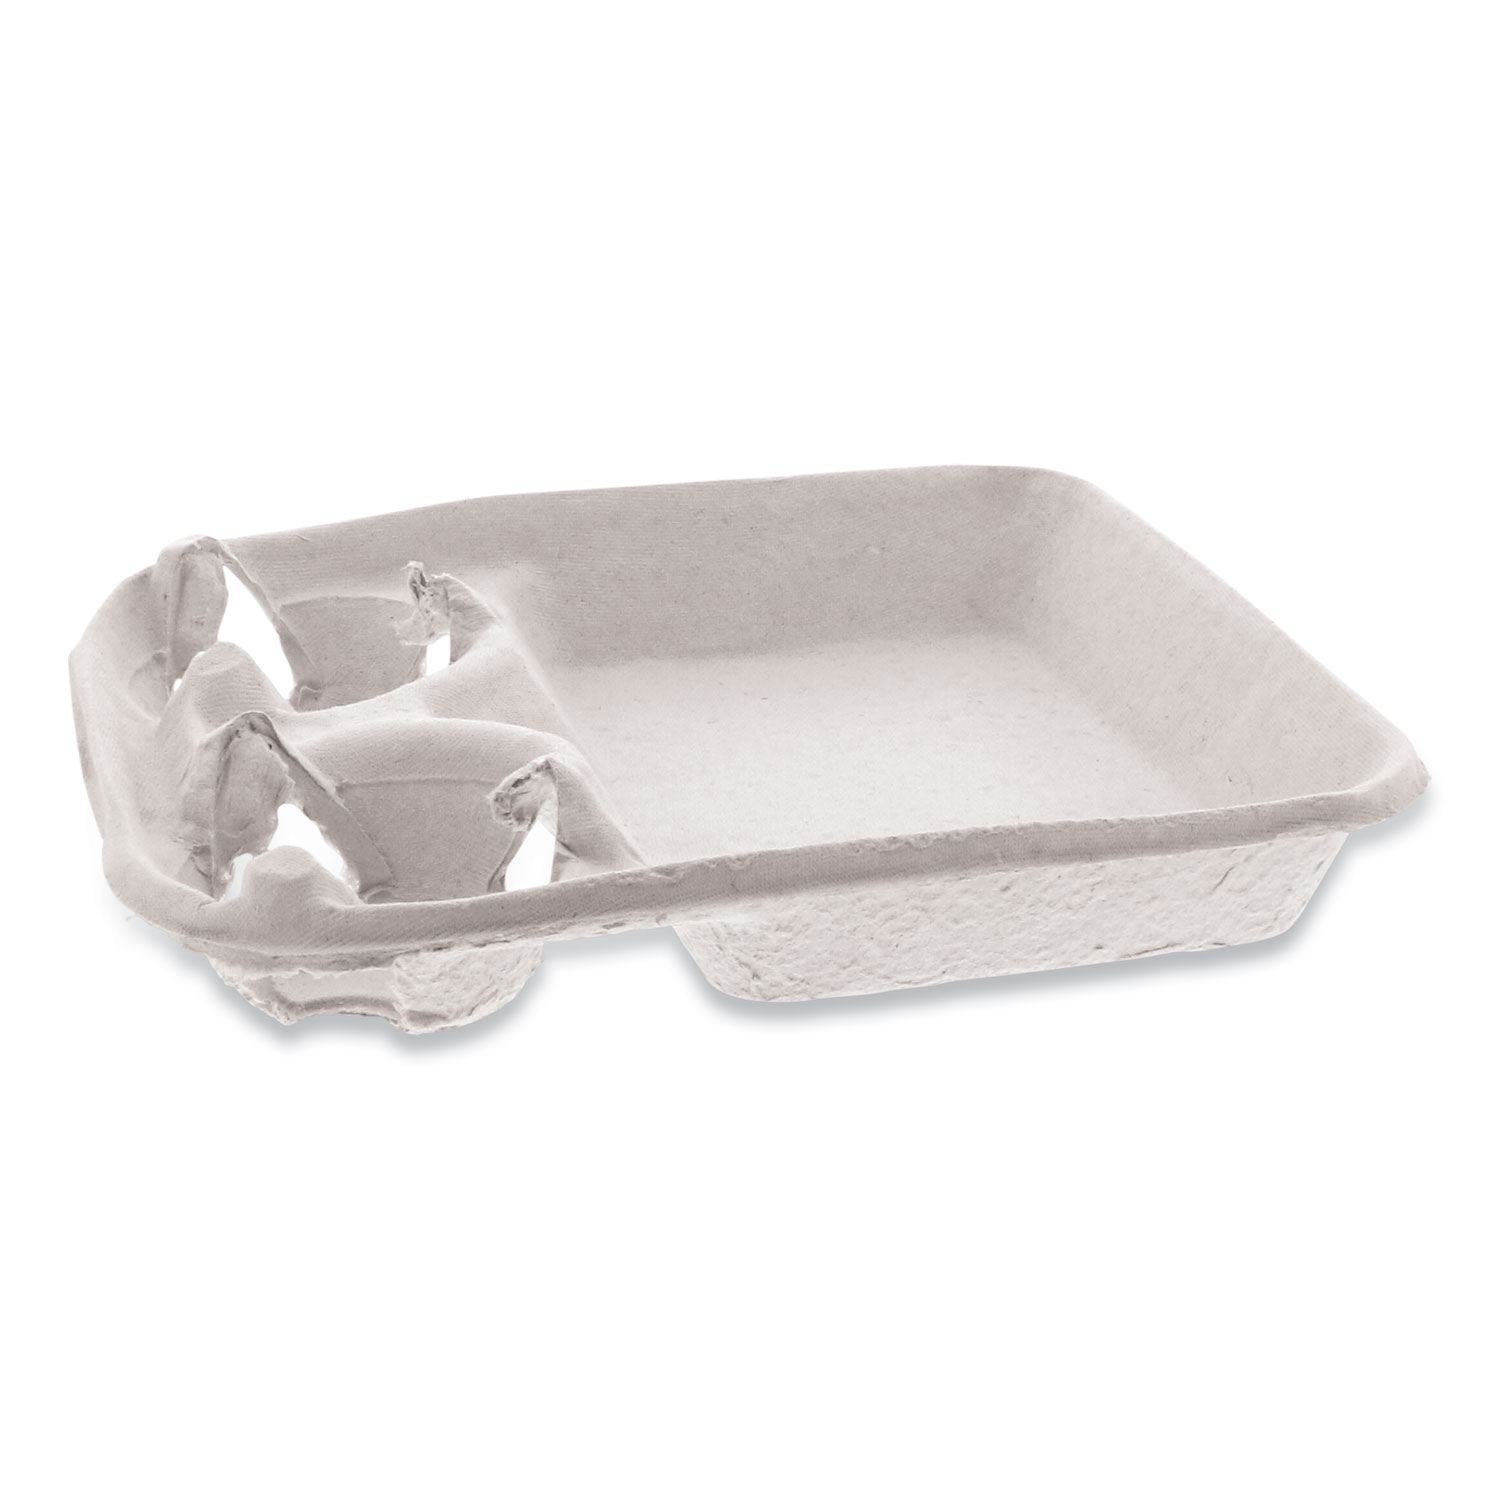 Pactiv EarthChoice Two-Cup Carrier with Food Tray, 8-24 oz, Two Cups, 200/Carton